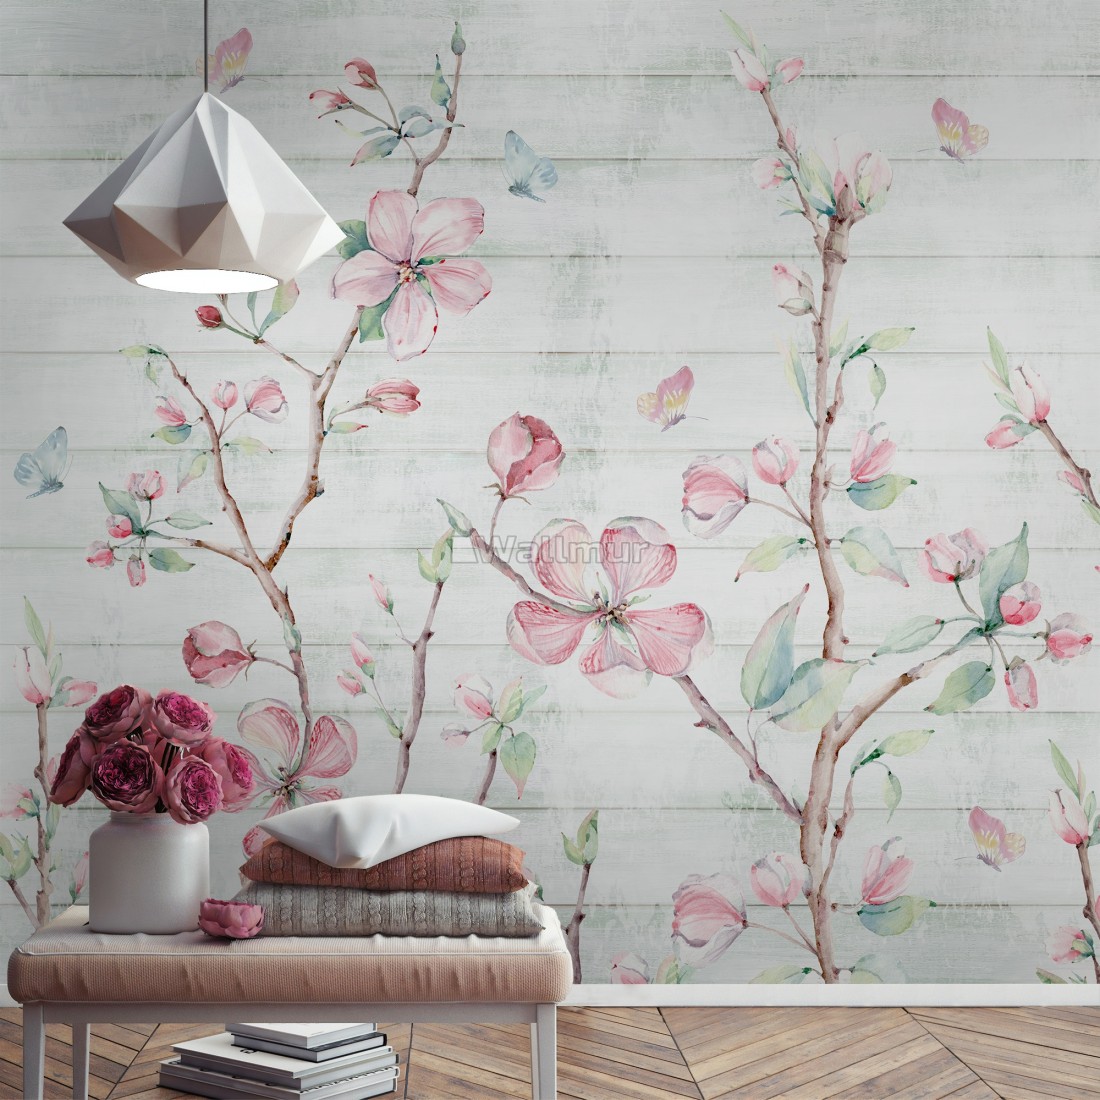 Cherry Blossom Painting Wallpapers